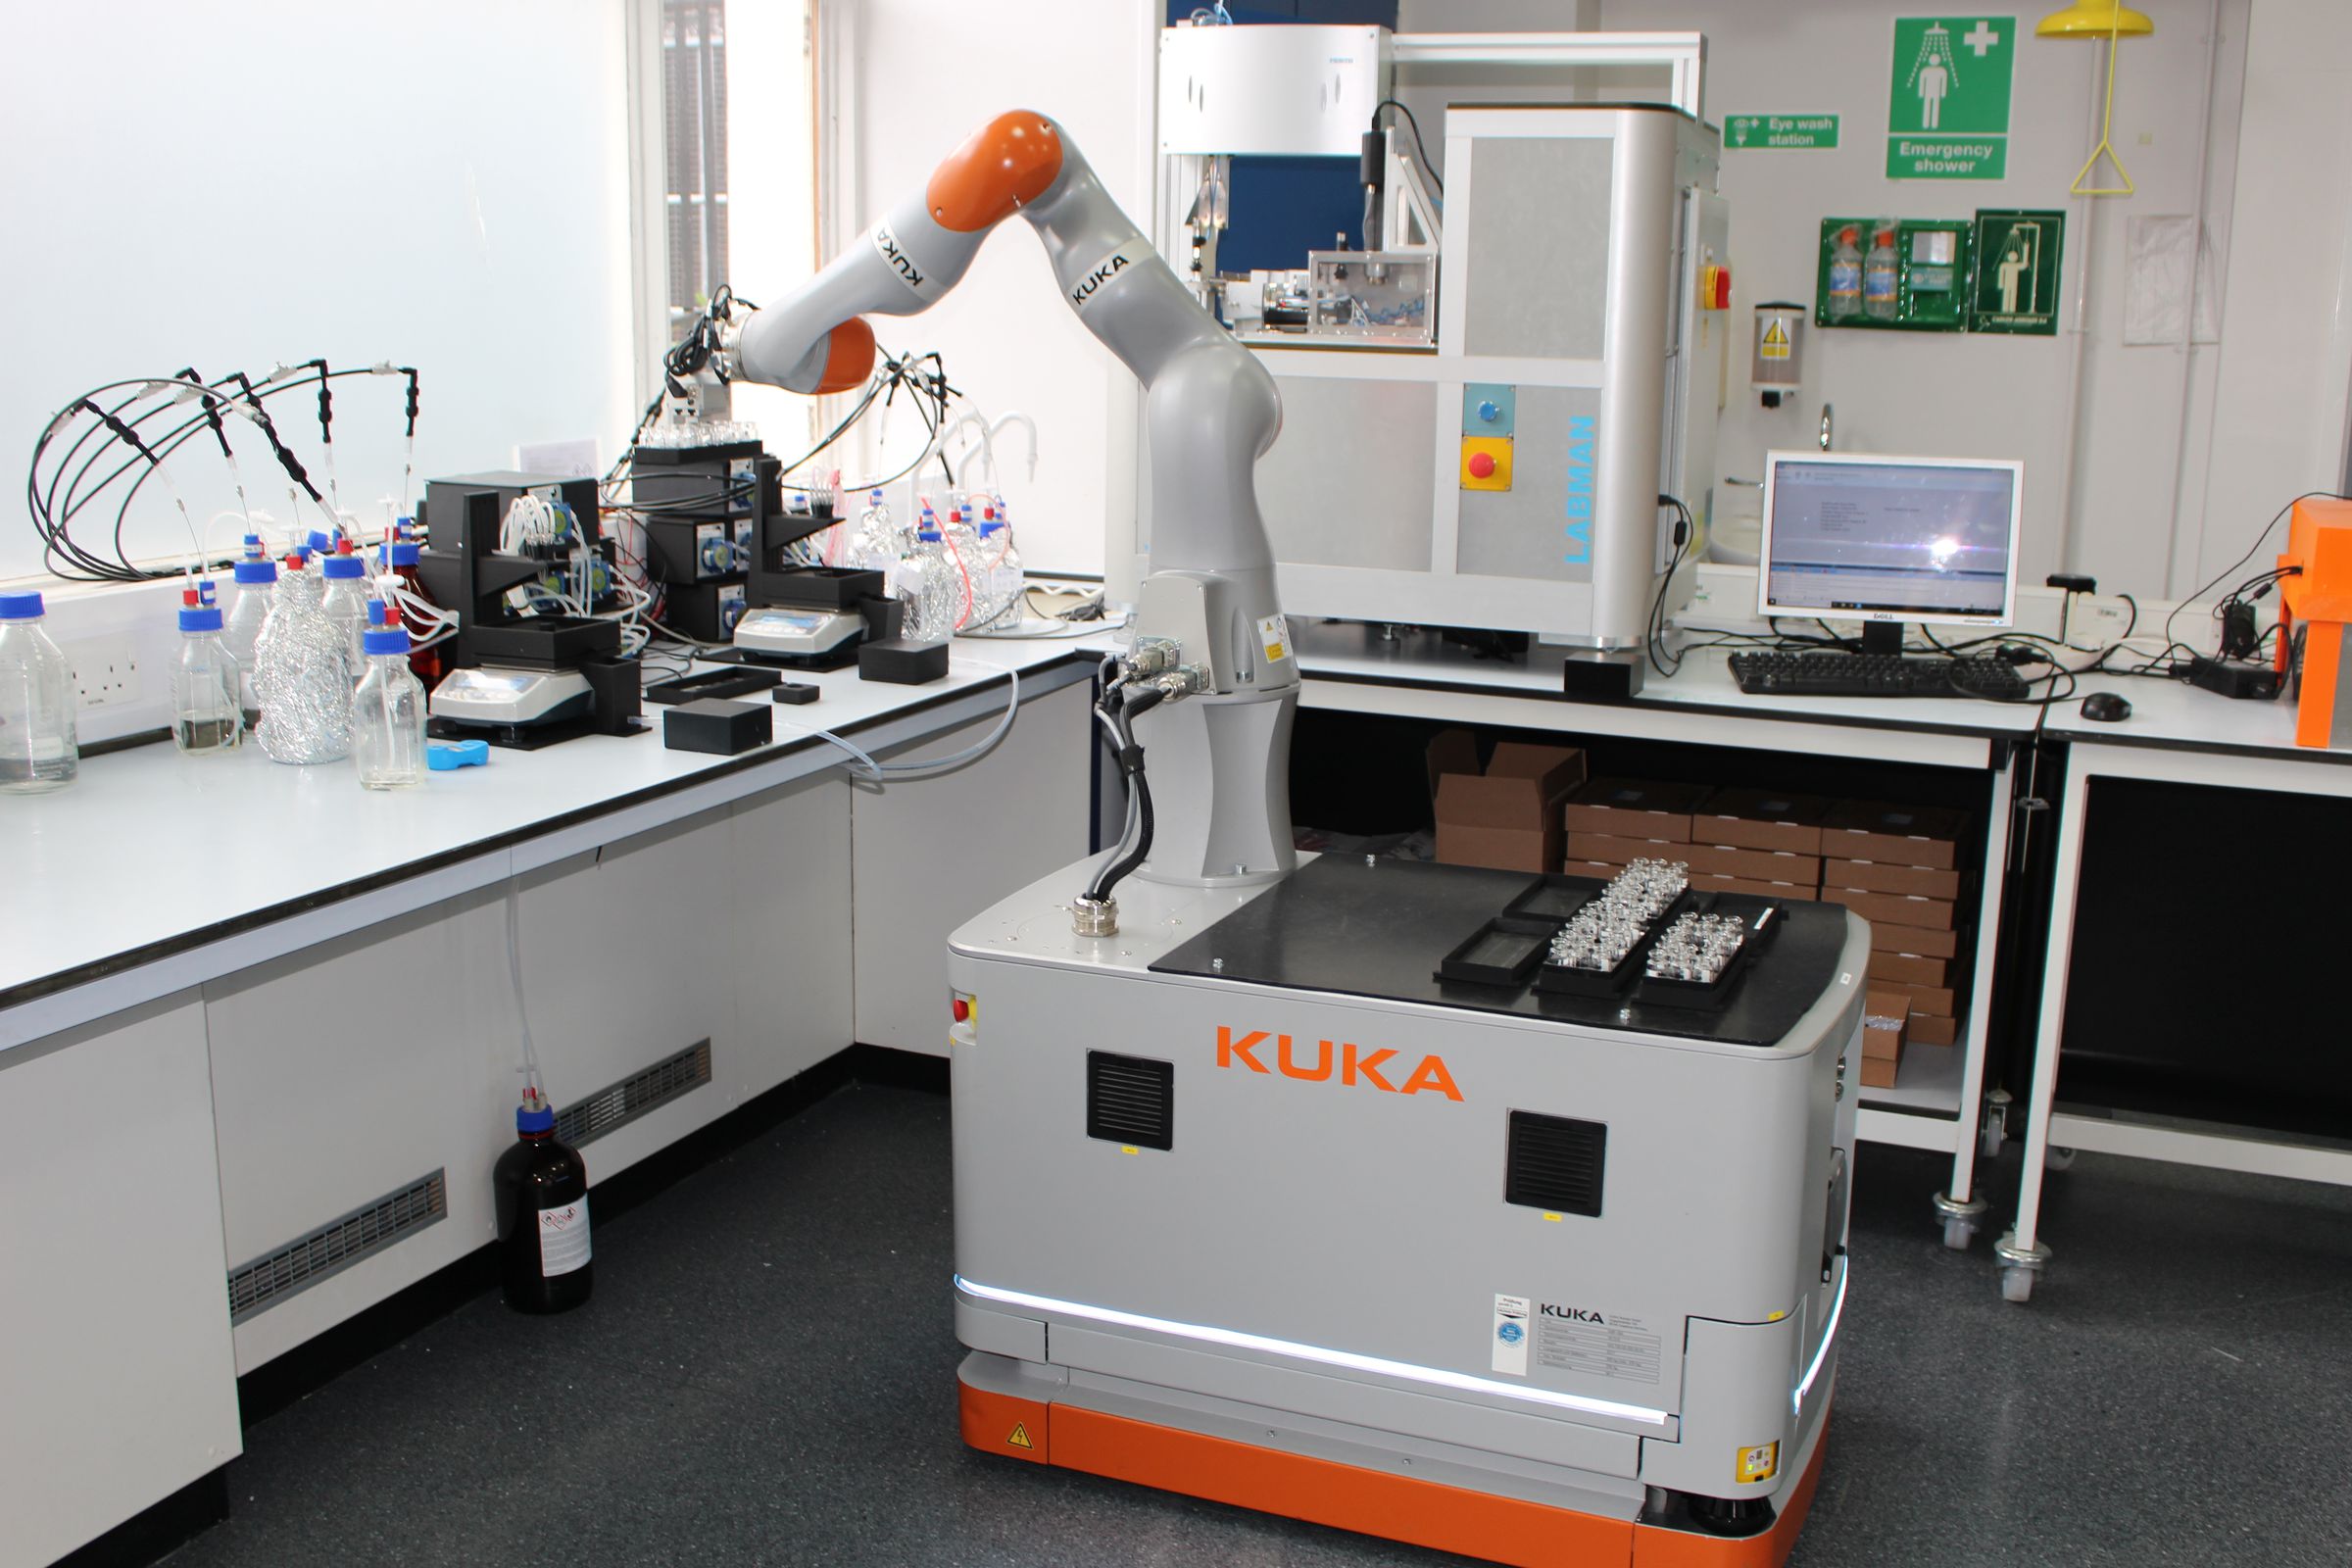 The machine uses an industrial robotic arm to manipulate equipment made for humans. 